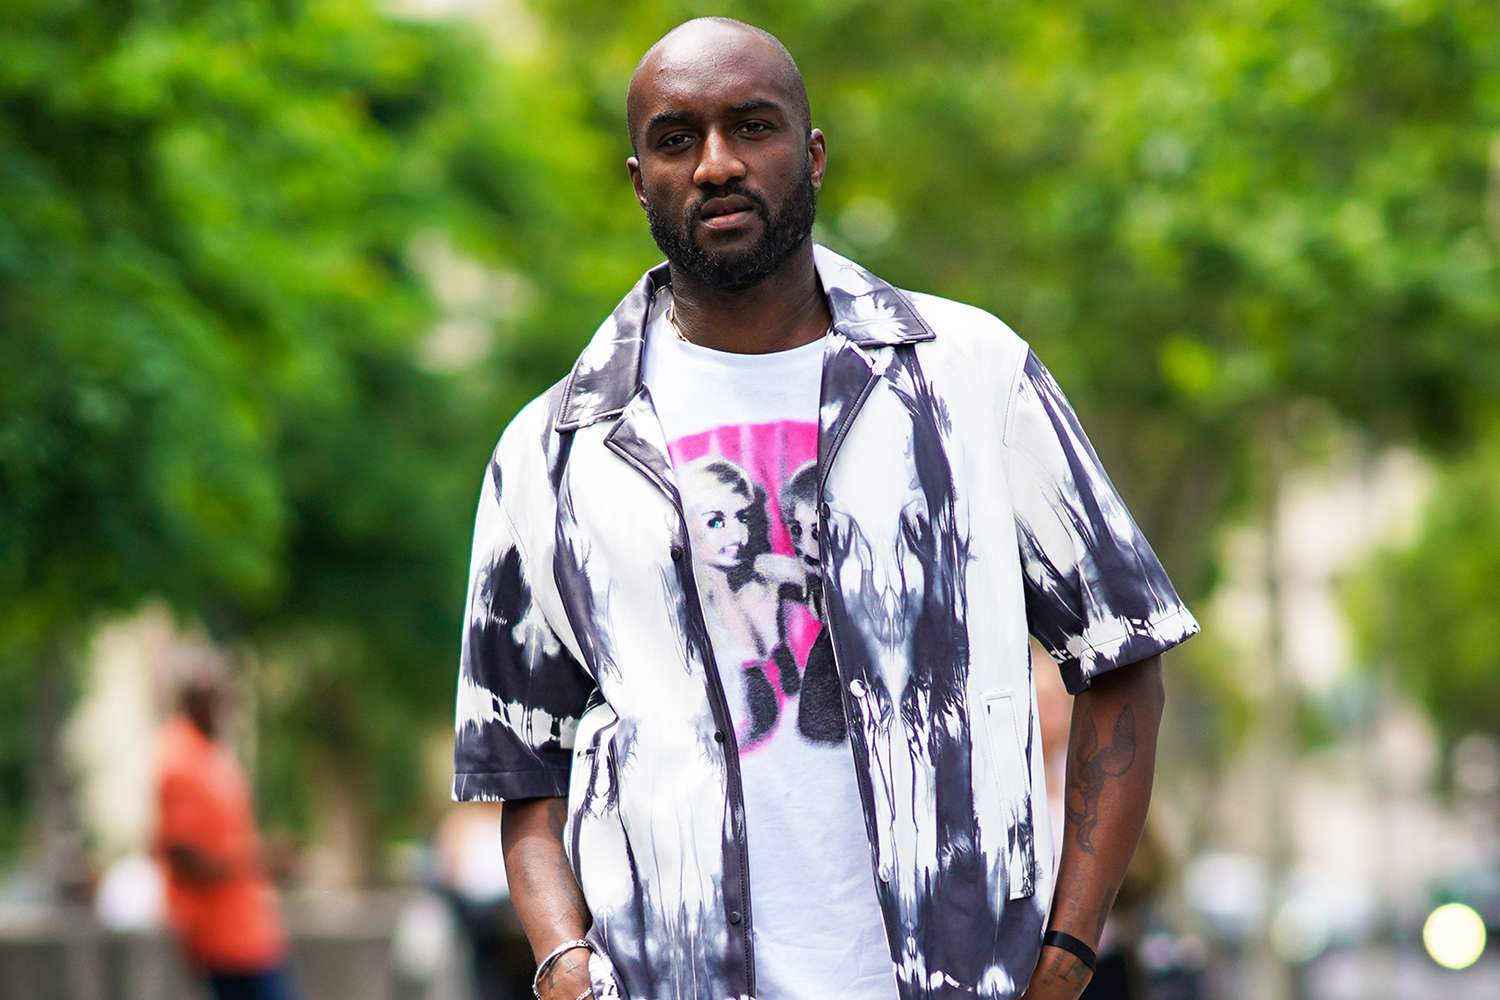 Virgil Abloh wears a white t-shirt with a picture print, a tie and dye black and white shirt, outside Heron Preston, during Paris Fashion Week - Menswear Spring/Summer 2020, on June 18, 2019 in Paris, France.